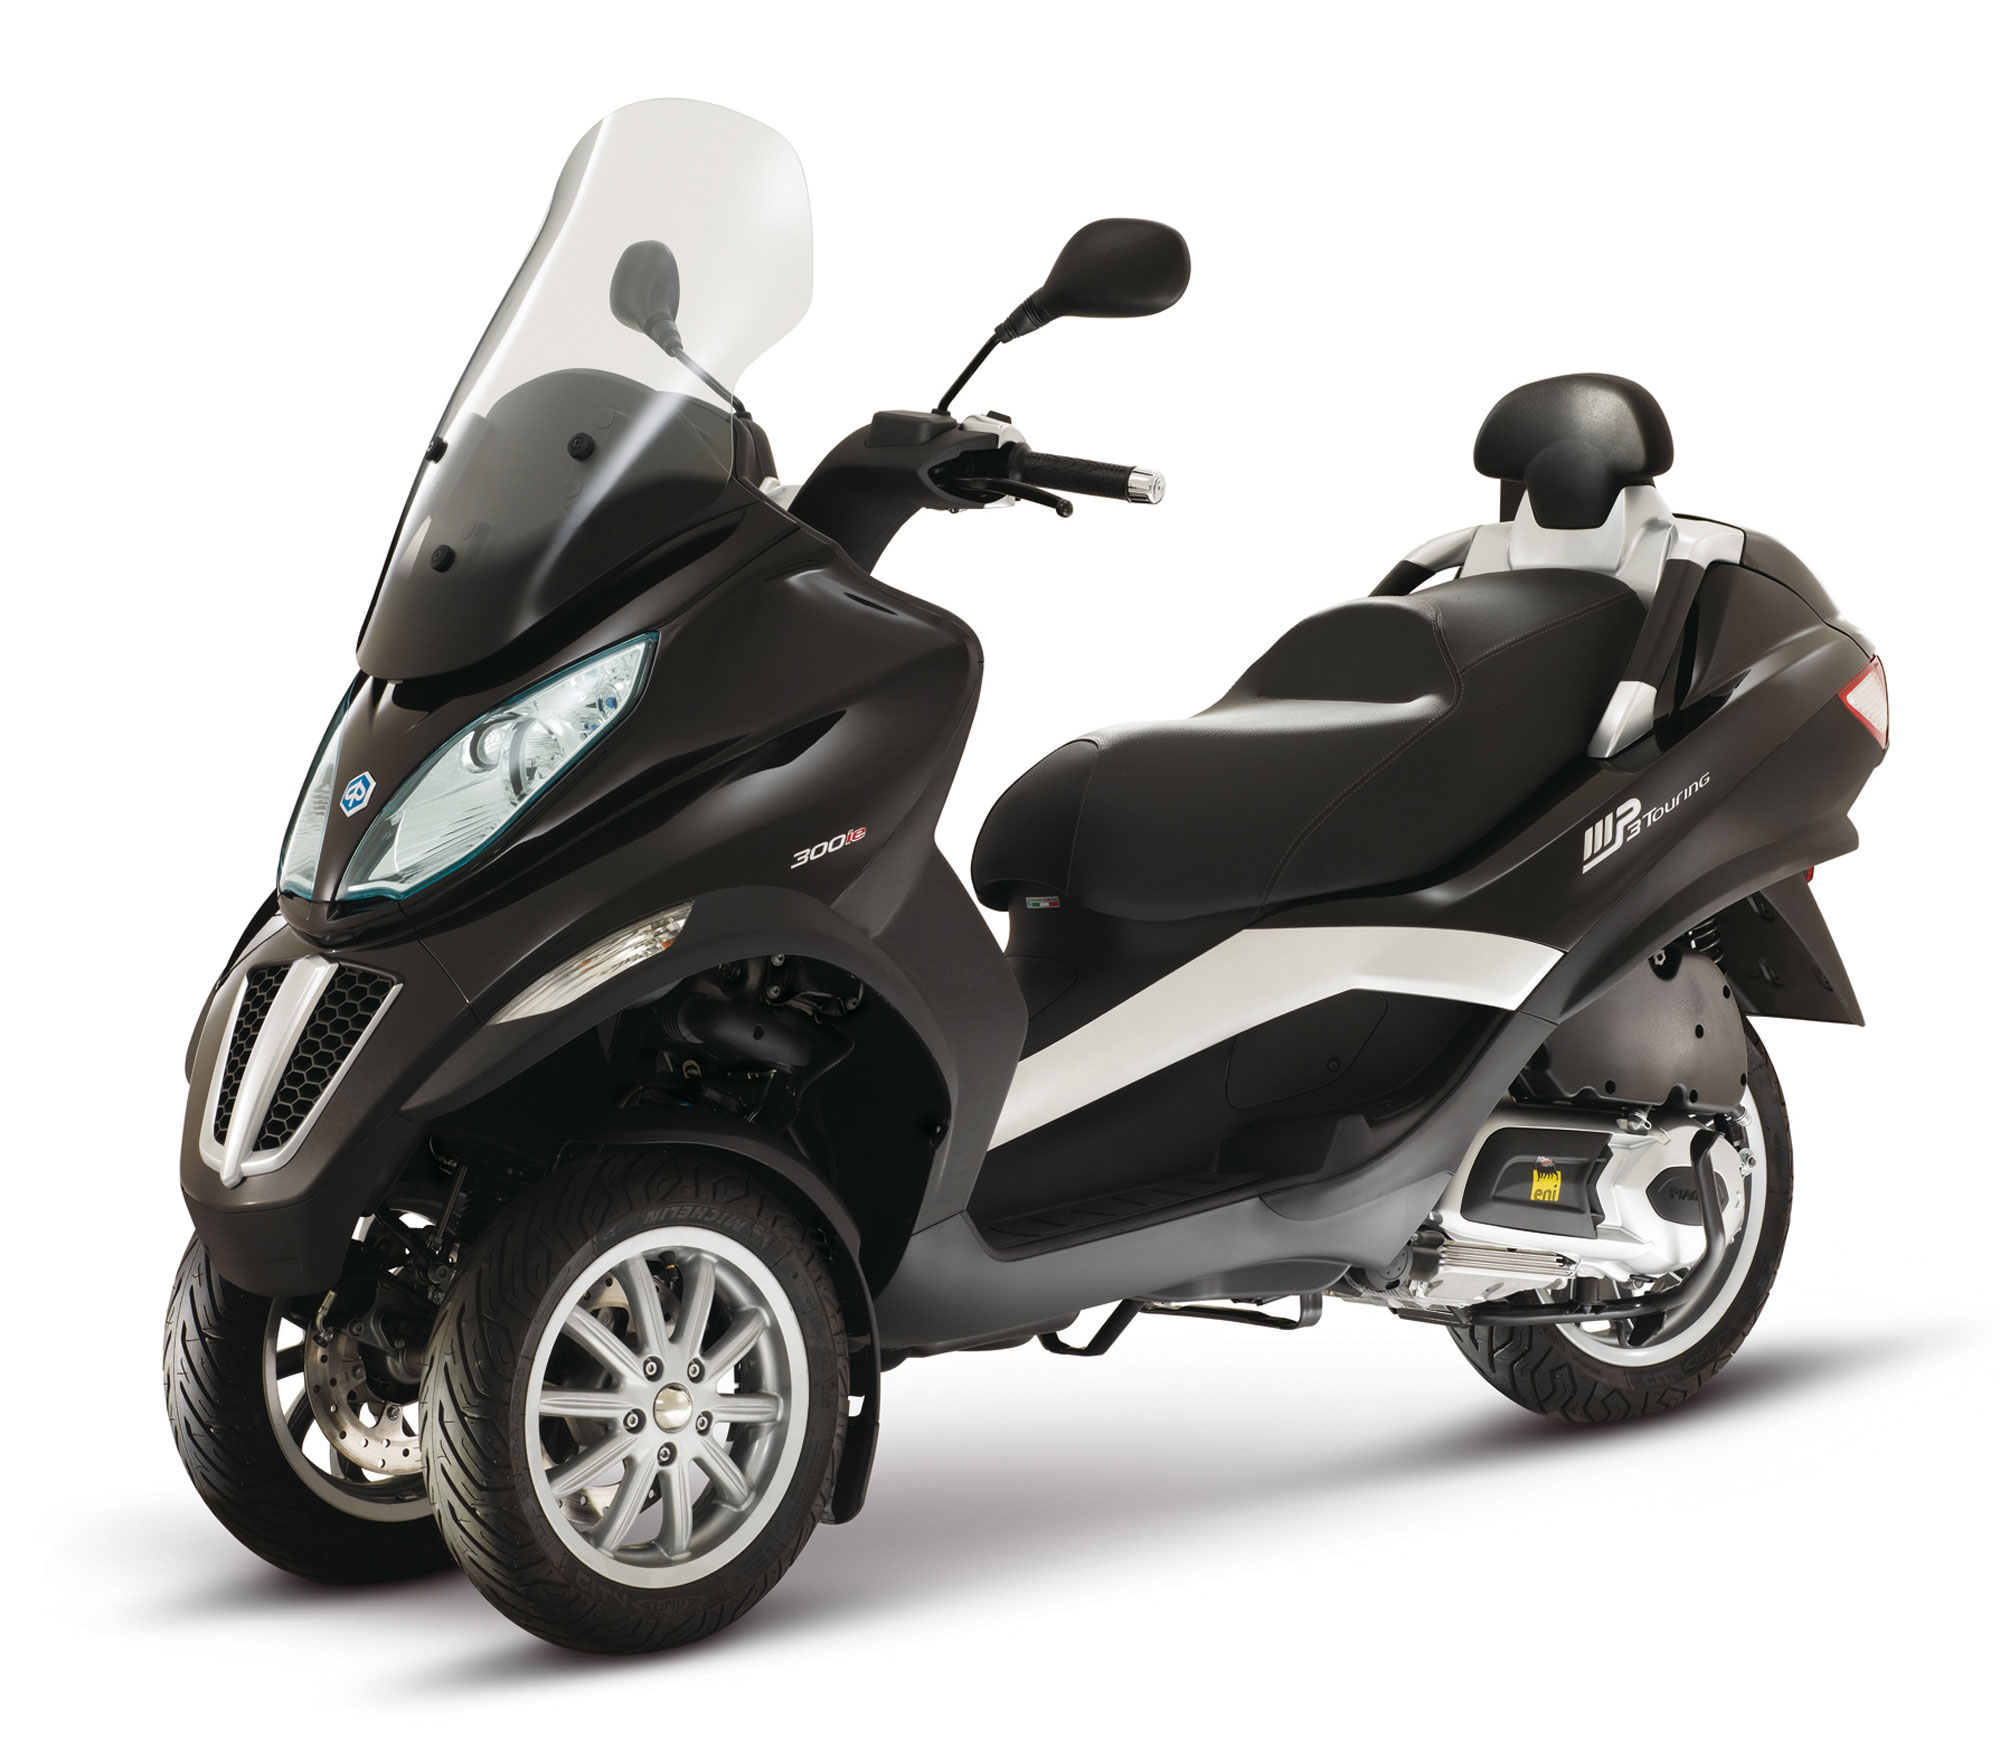  Piaggio  MP3 Hybrid scooter imported for R D purpose